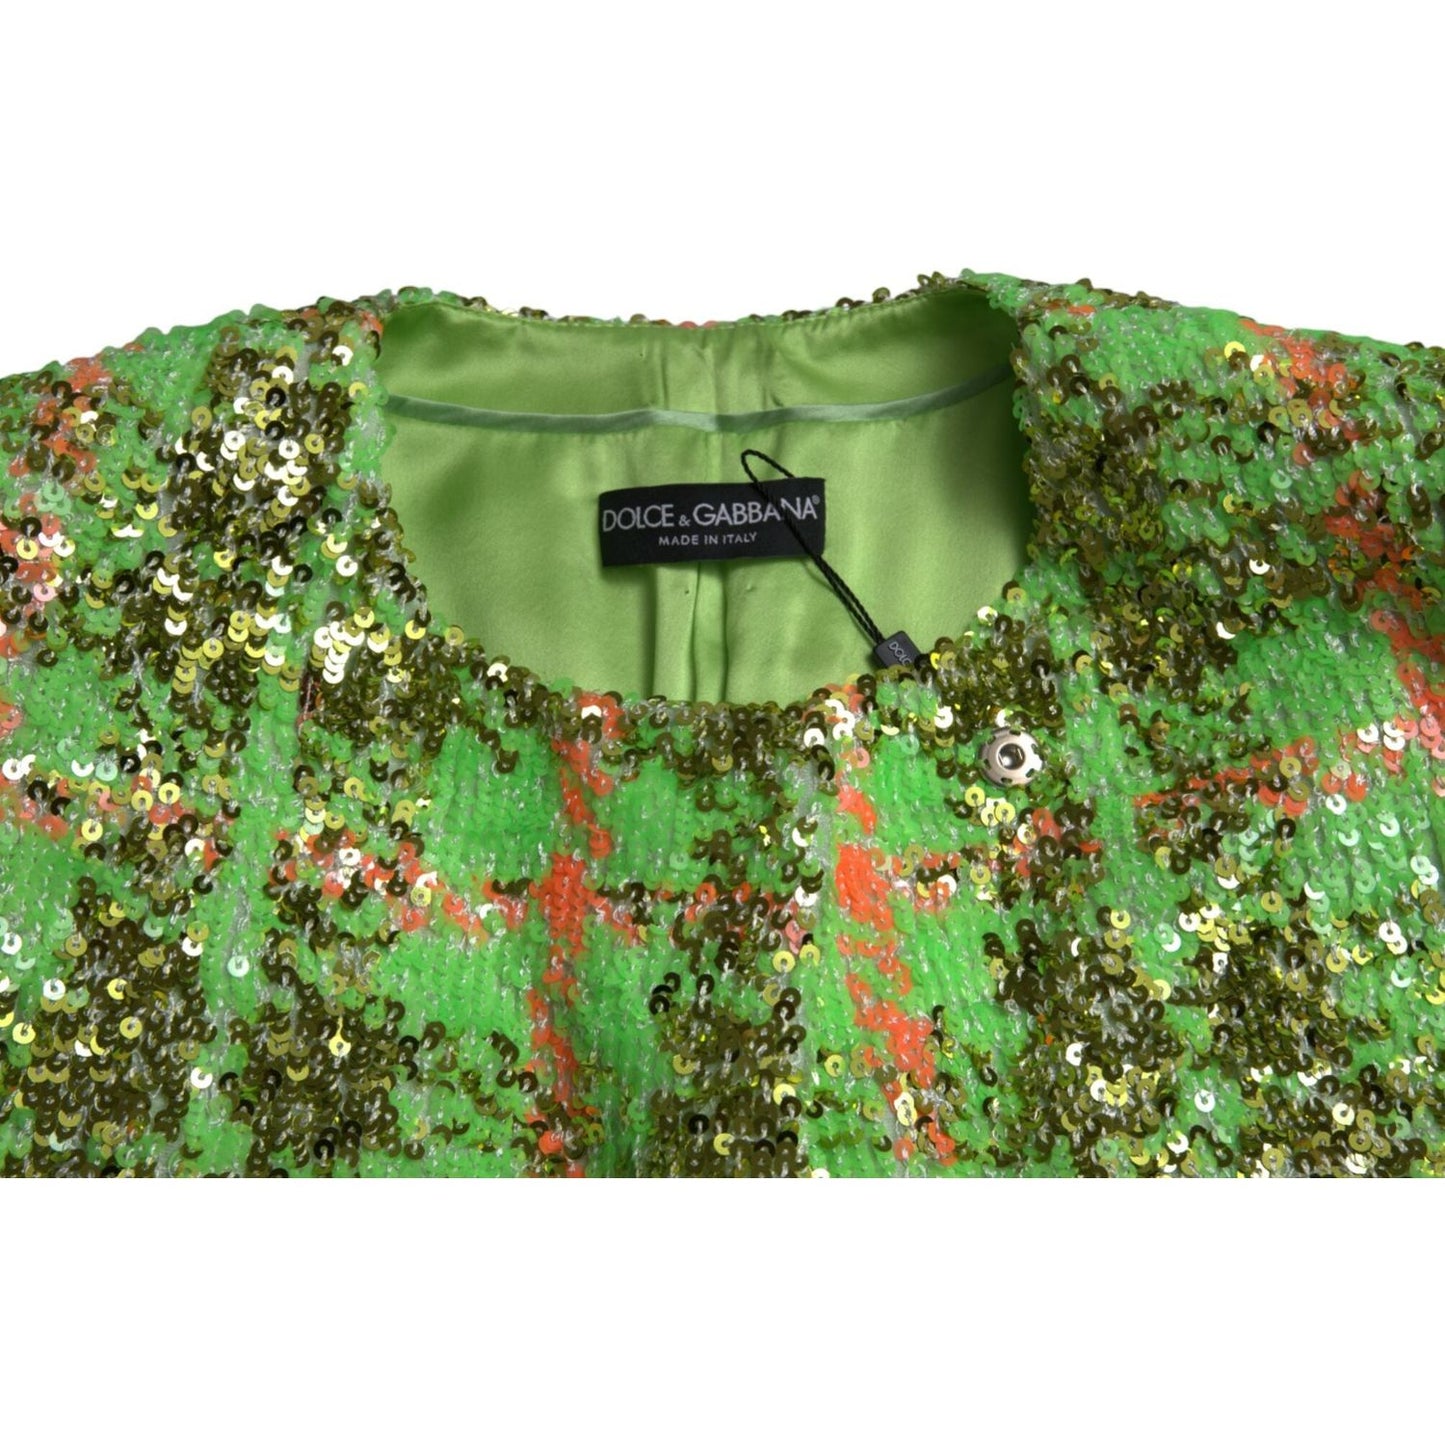 Dolce & Gabbana Exquisite Sequined Long Coat Jacket in Green green-nylon-sequinned-checkered-coat-jacket